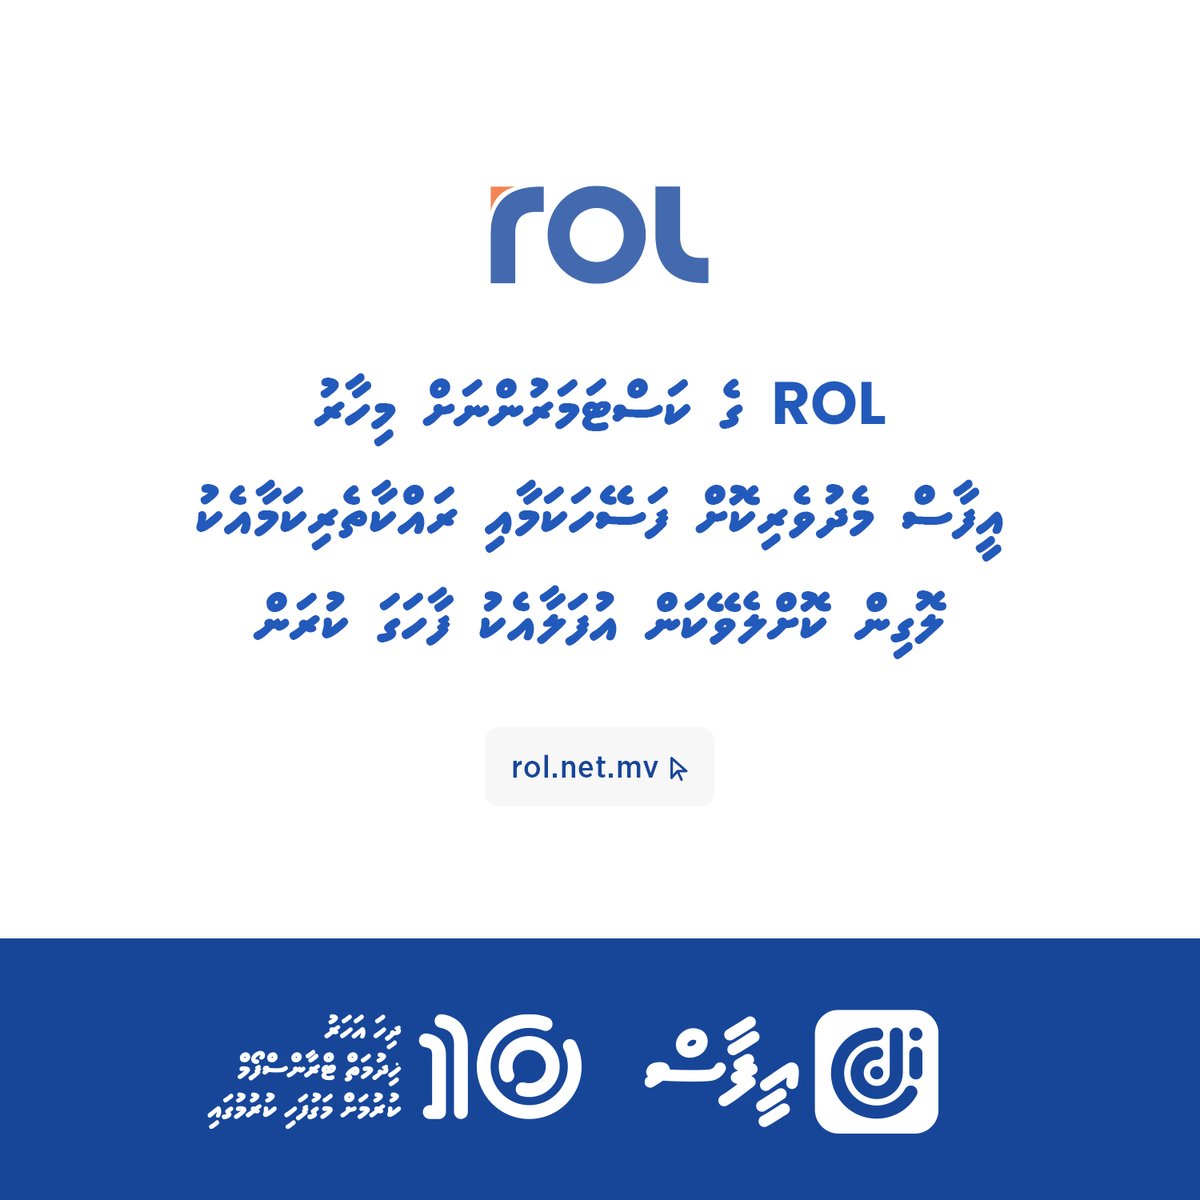 So happy to announce that @ROLMaldives now uses eFaas for your convenience and security. Thank you so much again for your support and cooporation. Link: rol.net.mv #efaas #digitalidentity #DigitalMaldives #TransformGovernment